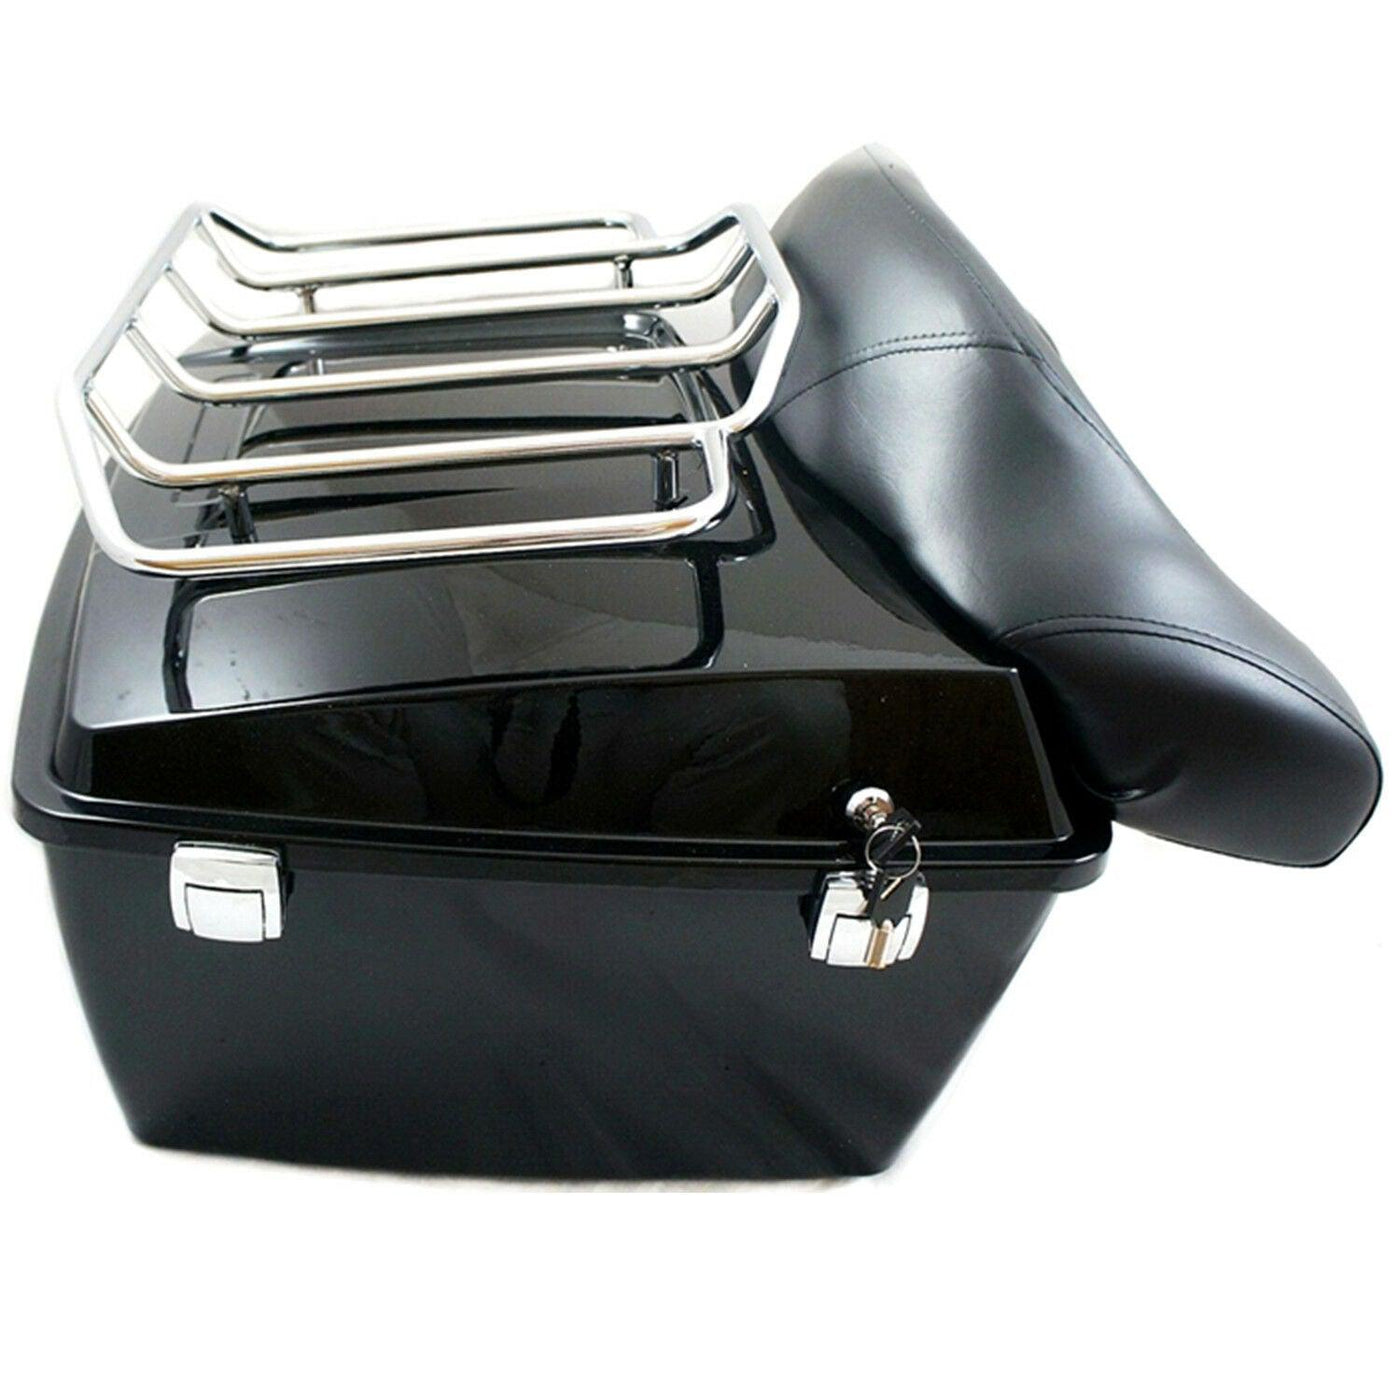 King Tour Pack Trunk w/ Mounting Luggage Rack For Harley Davidson Touring 09-13 - Moto Life Products